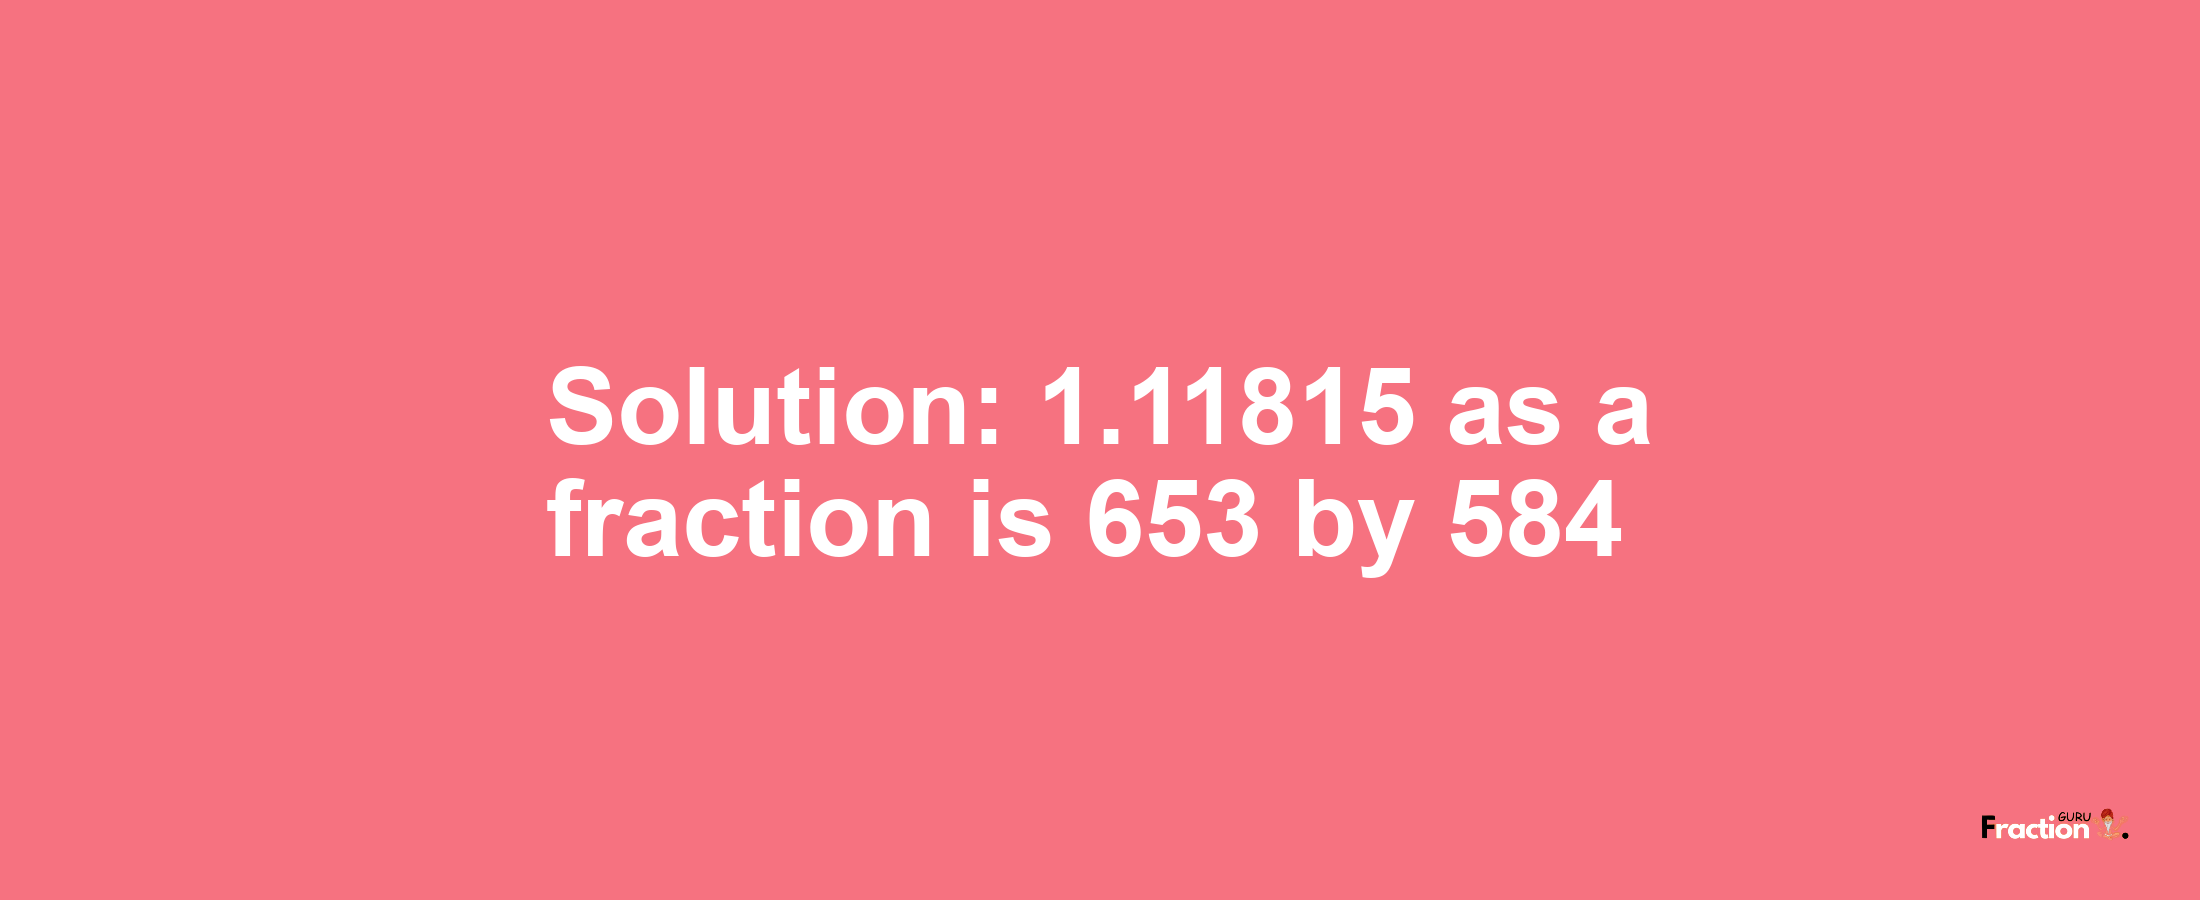 Solution:1.11815 as a fraction is 653/584